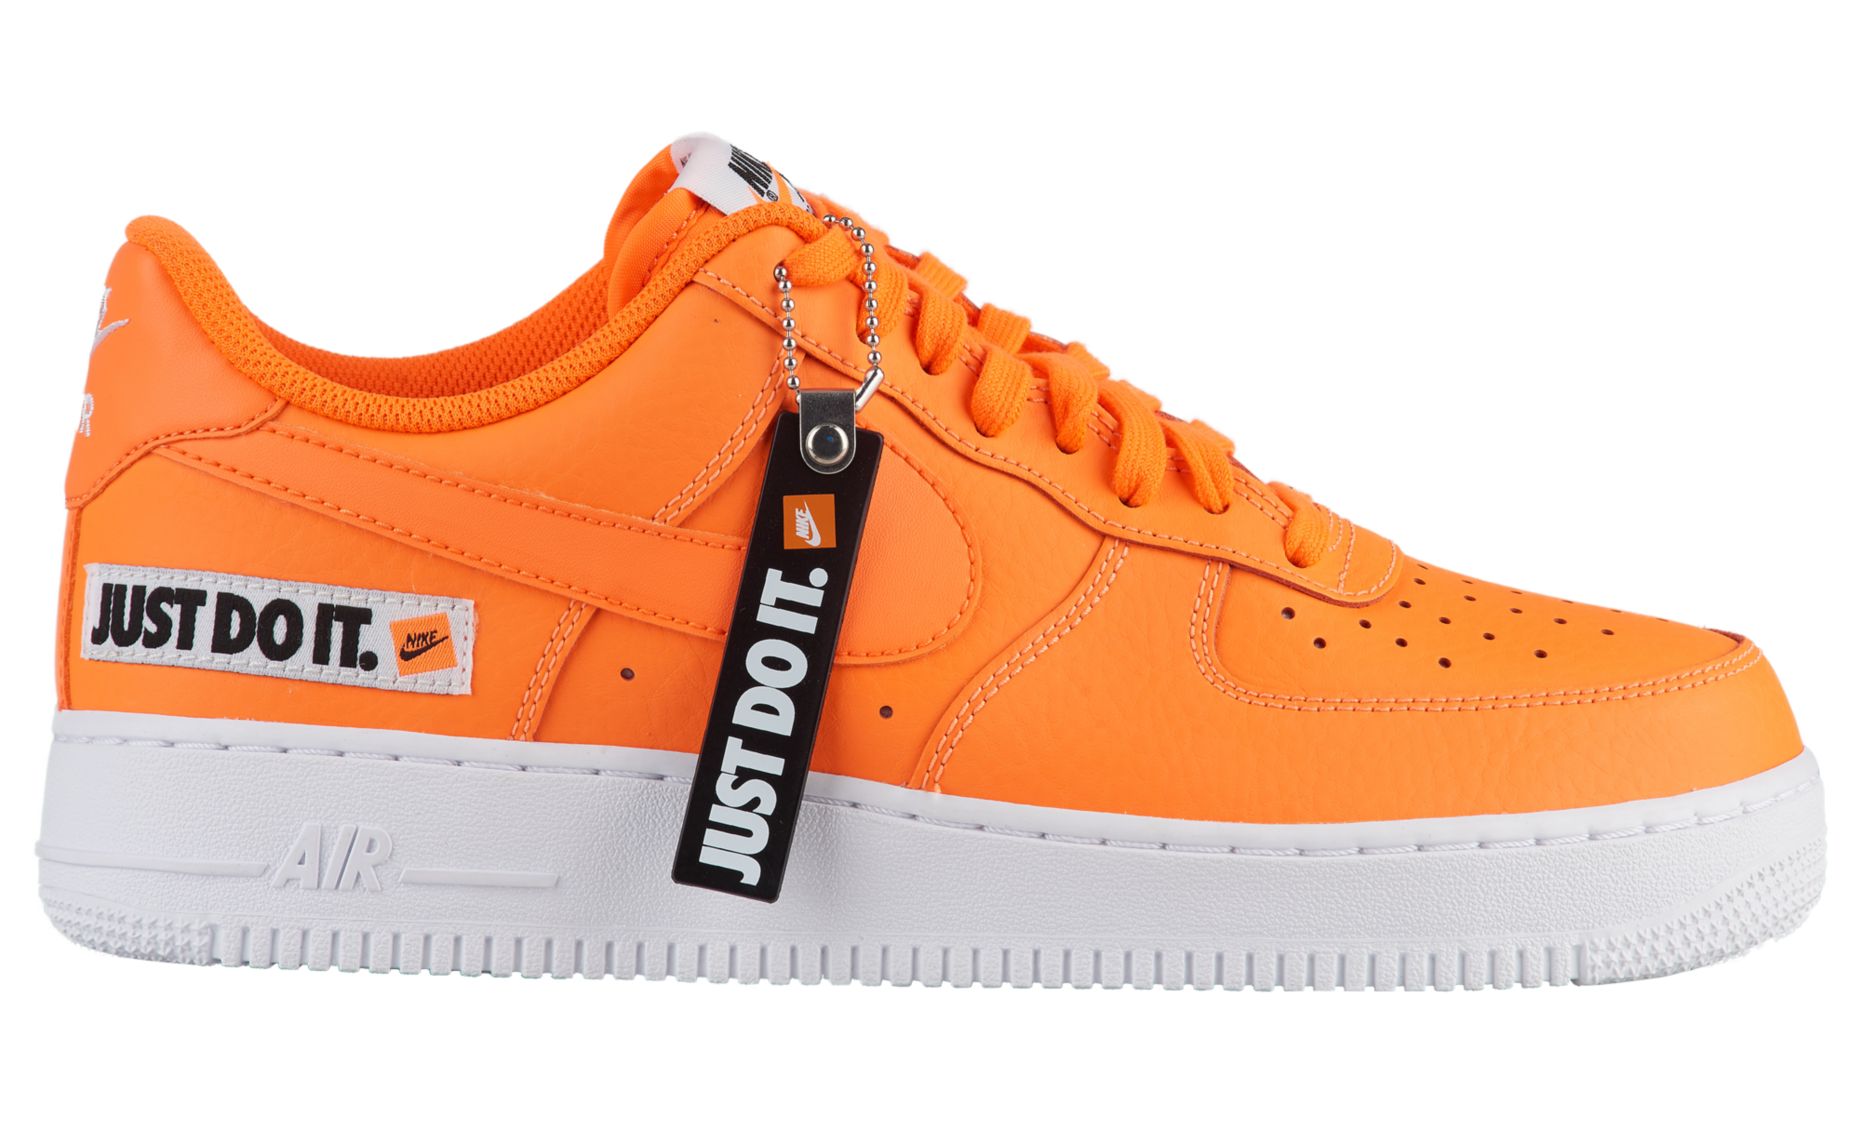 The Nike Air Force 1 Low 'Just Do It' Has a Release Date - WearTesters